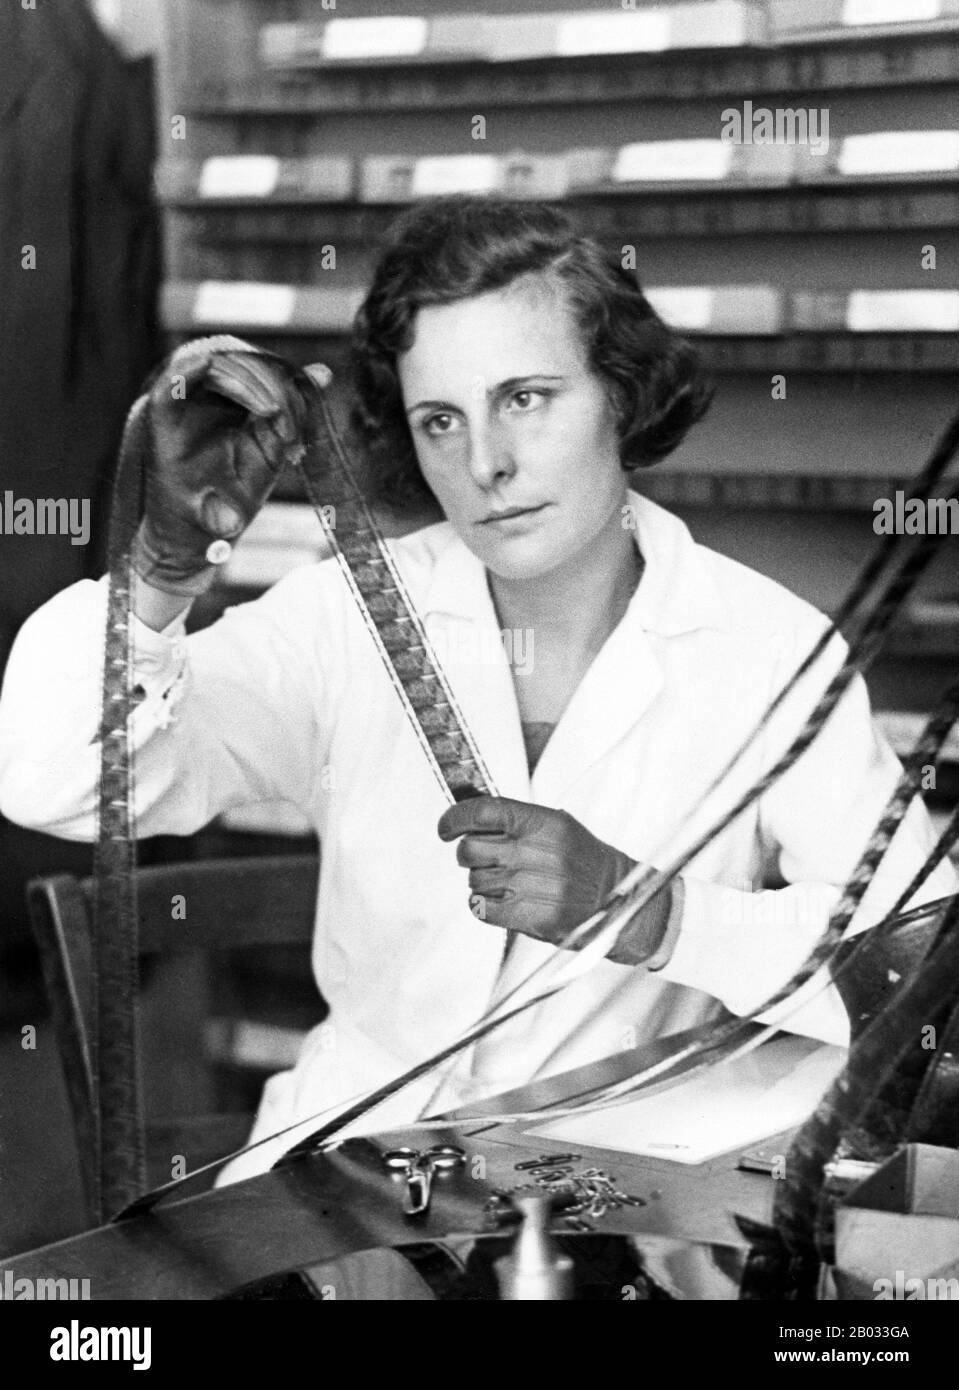 Helene Bertha Amalie 'Leni' Riefenstahl (22 August 1902 – 8 September 2003)  was a German film director, producer, screenwriter, editor, photographer,  actress, dancer, and propagandist for the Nazis Stock Photo - Alamy